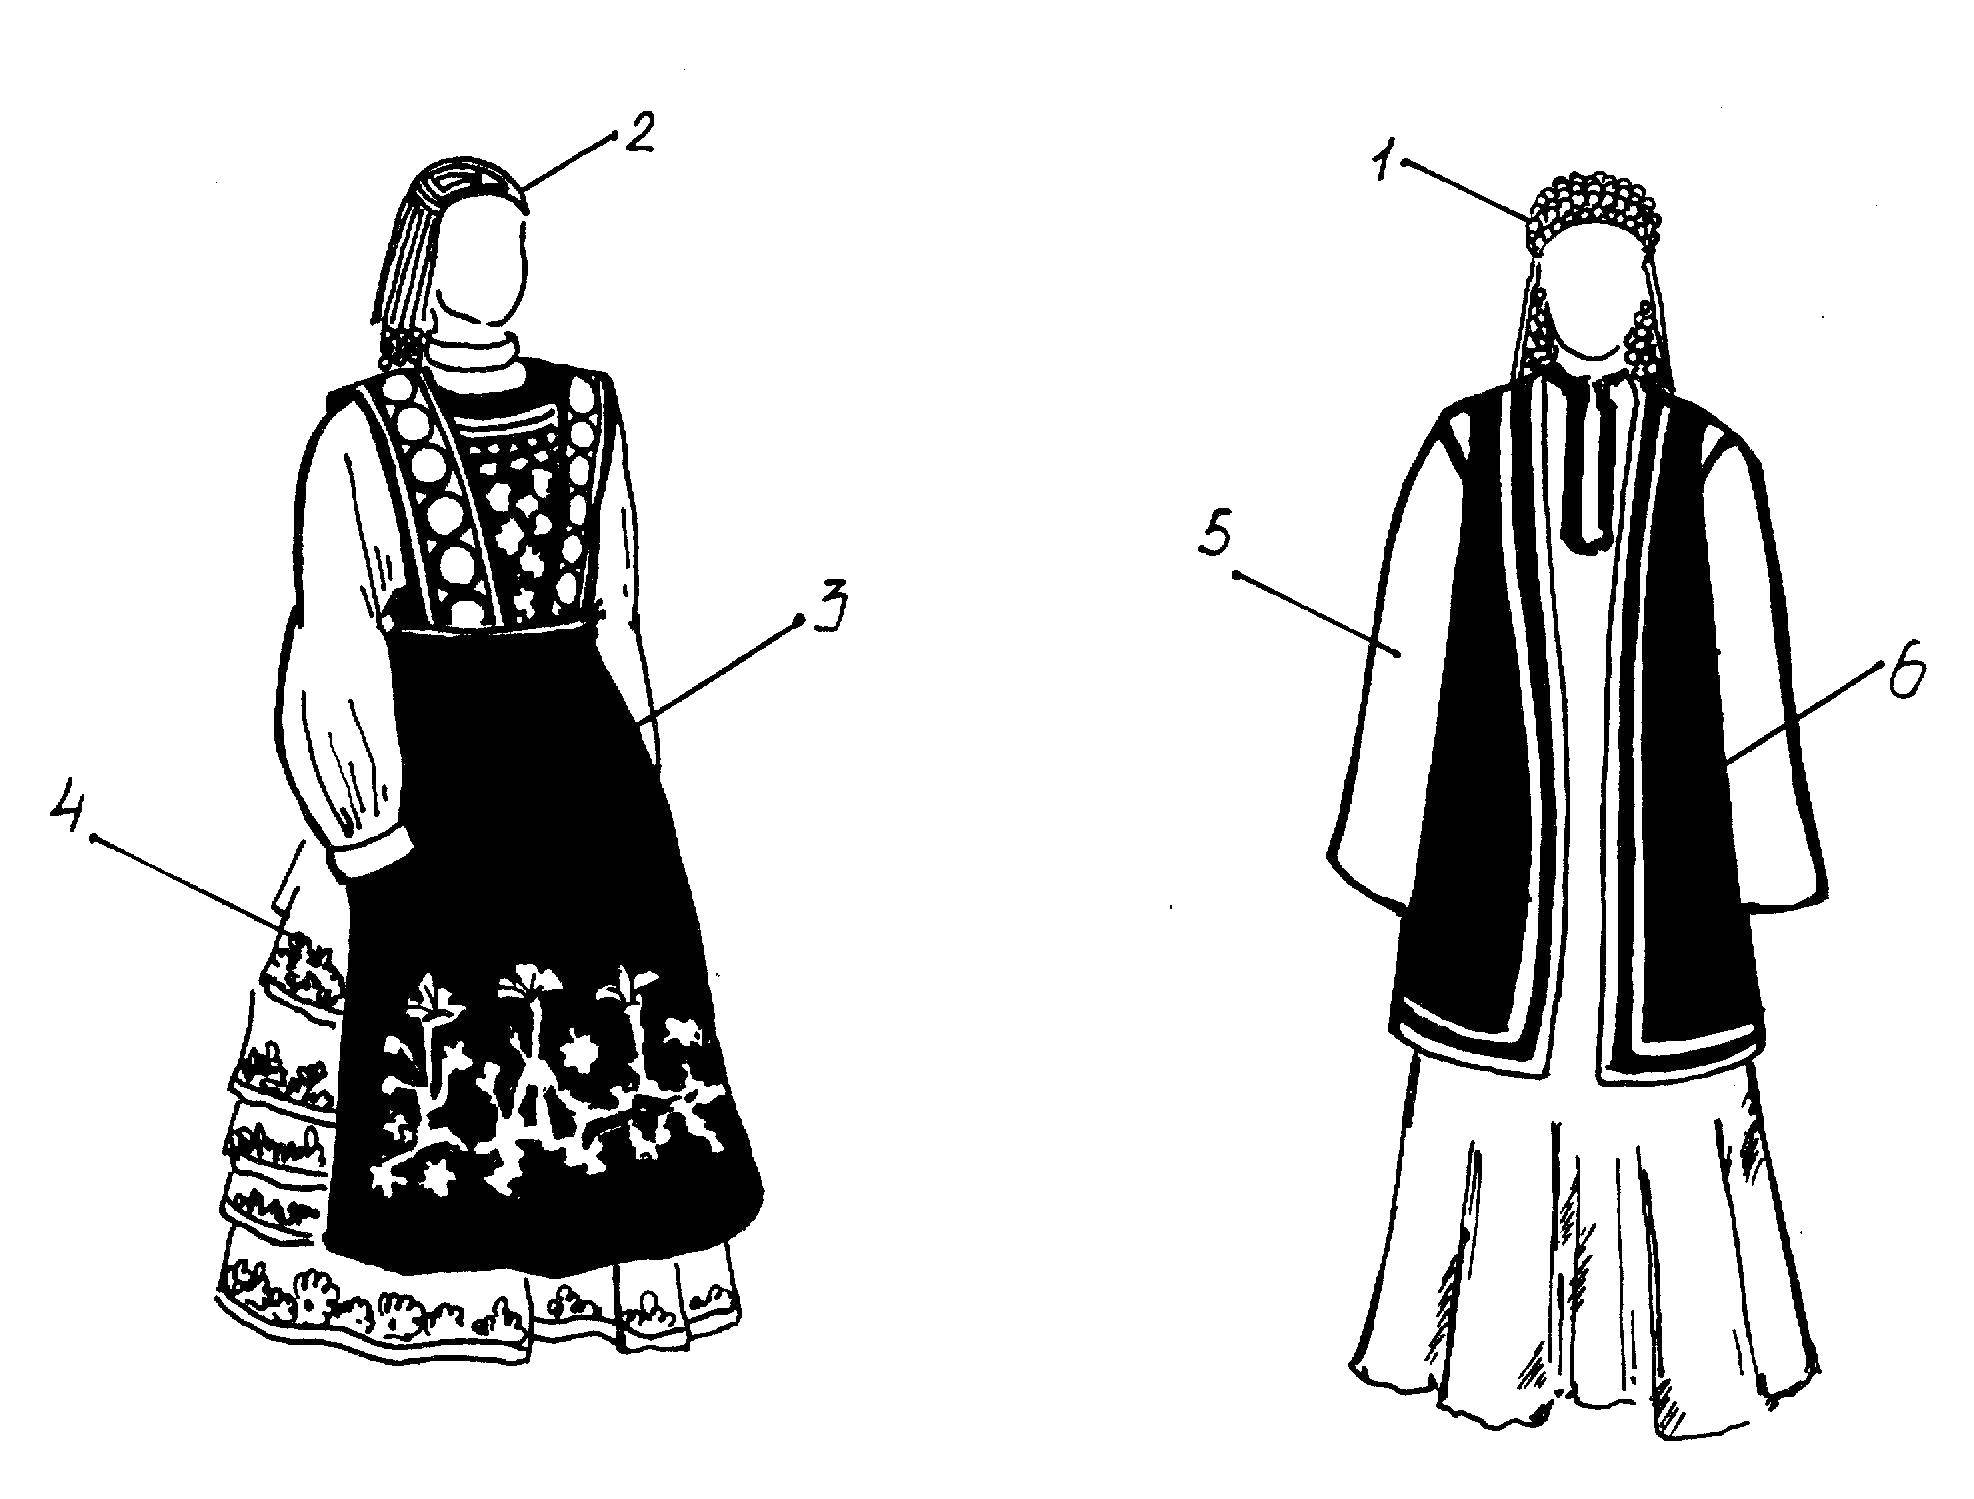 Coloring Clothing of different peoples. Category Clothing. Tags:  clothing.